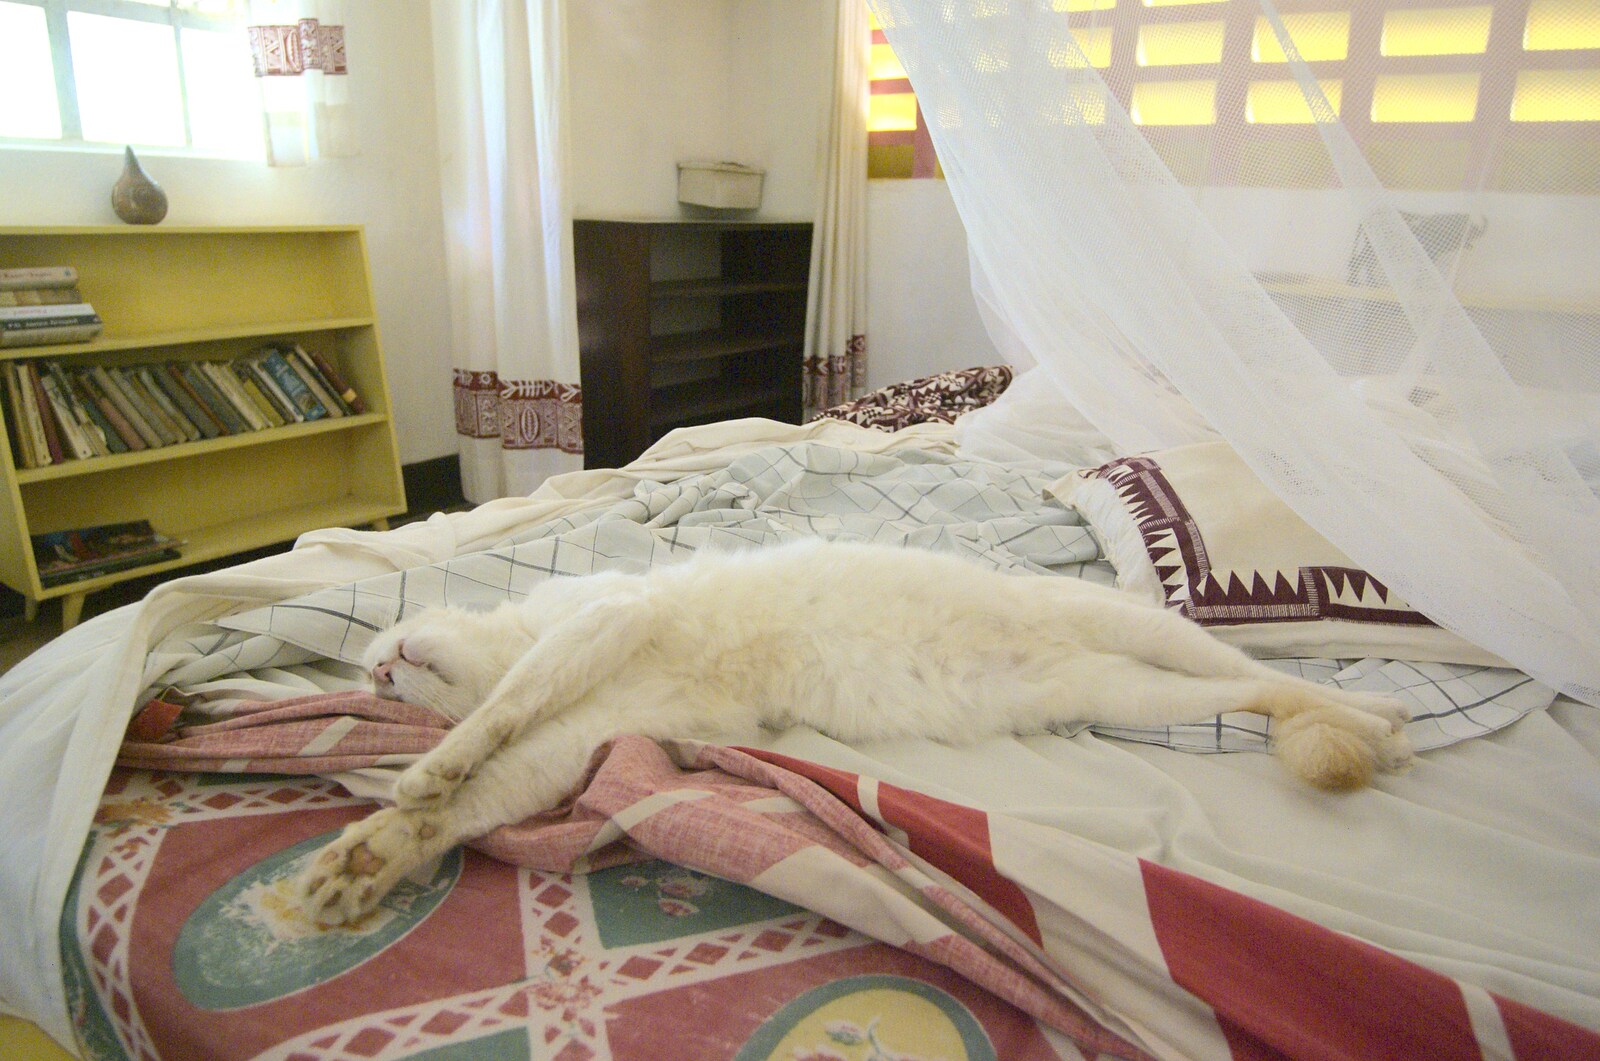 Long Train (not) Runnin': Tiwi Beach, Mombasa, Kenya - 7th November 2010: Patchy Cat sprawls out on our bed